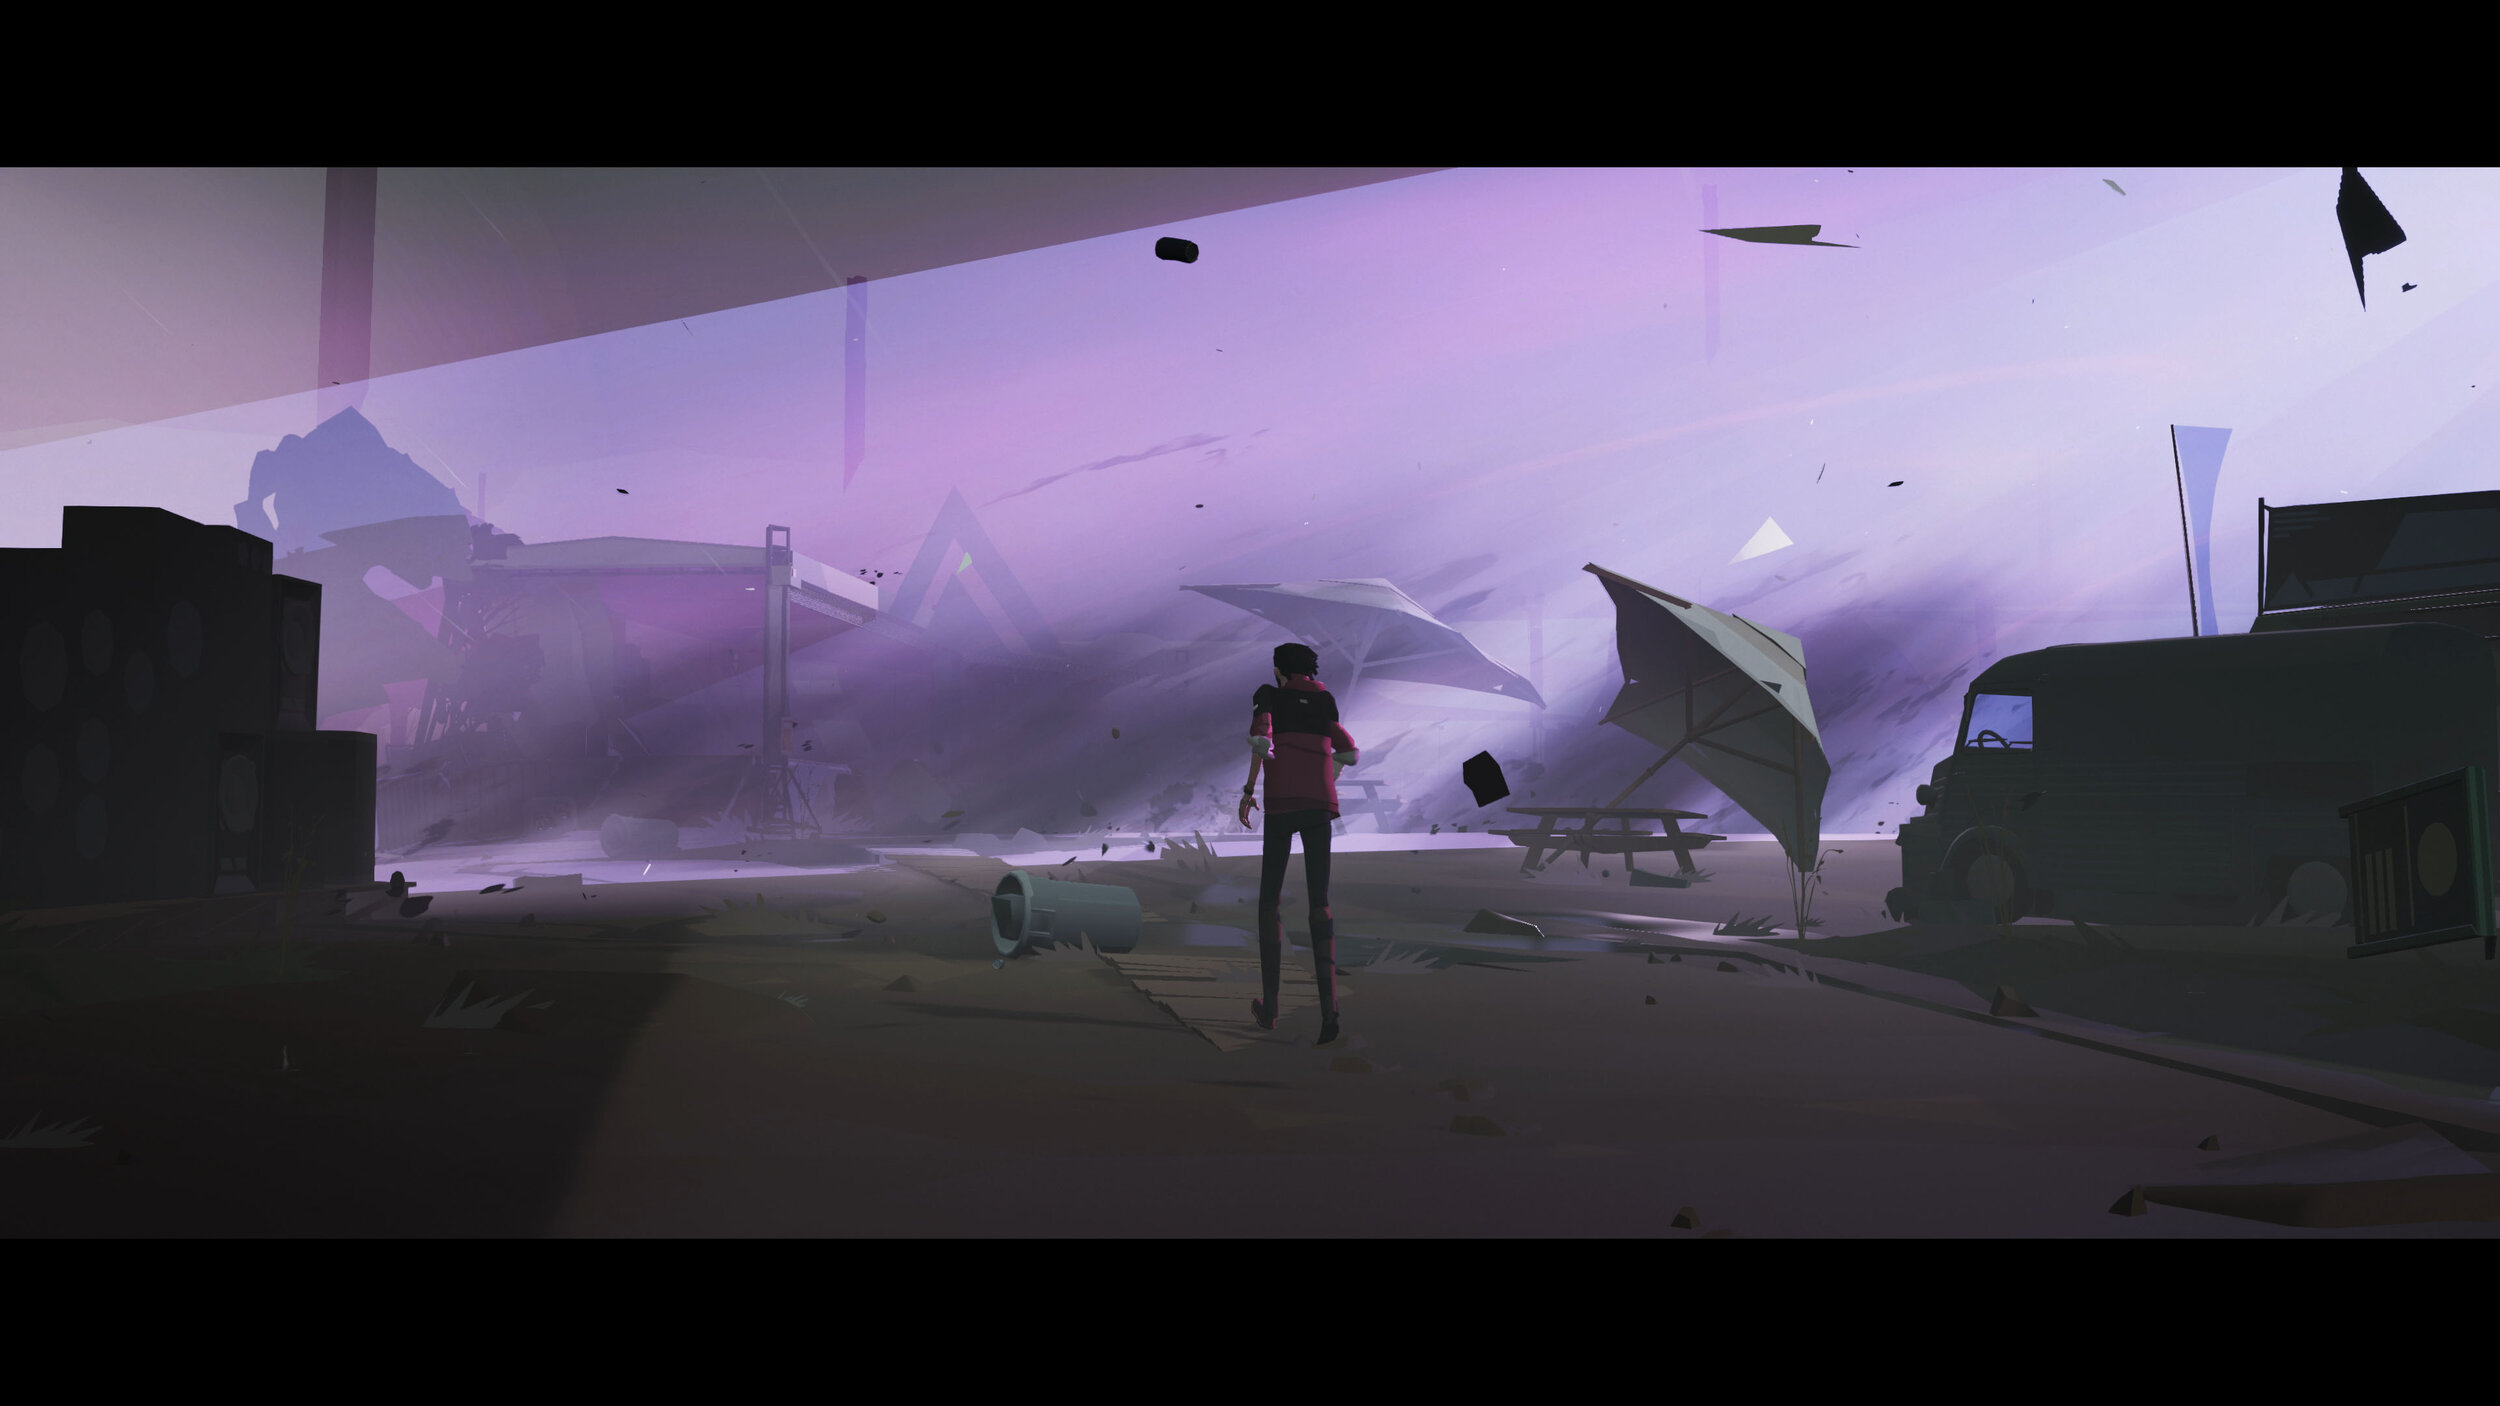 a screenshot from Somerville of a man walking through a windy storm with the sky bathed in a purple glow